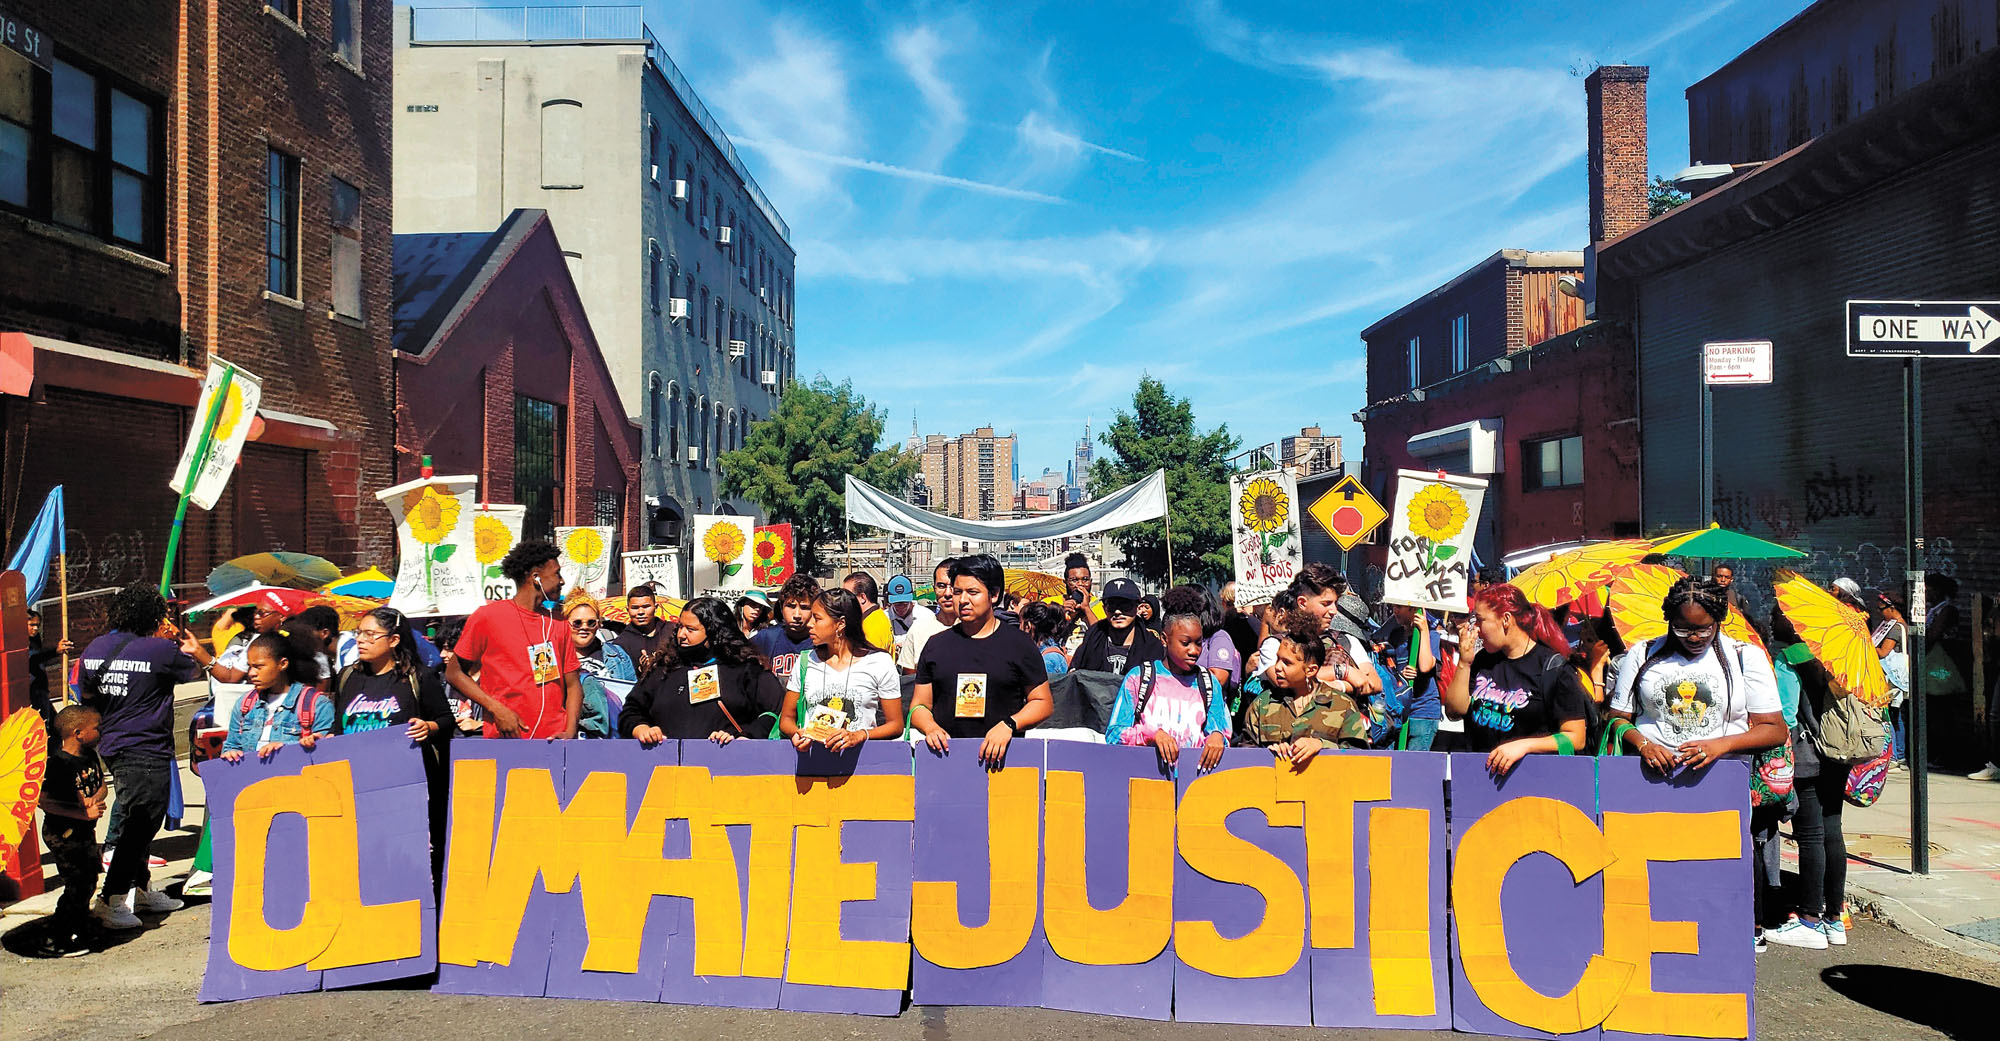 Climate justice protesters carrying a sign that reads "Climate Justice"